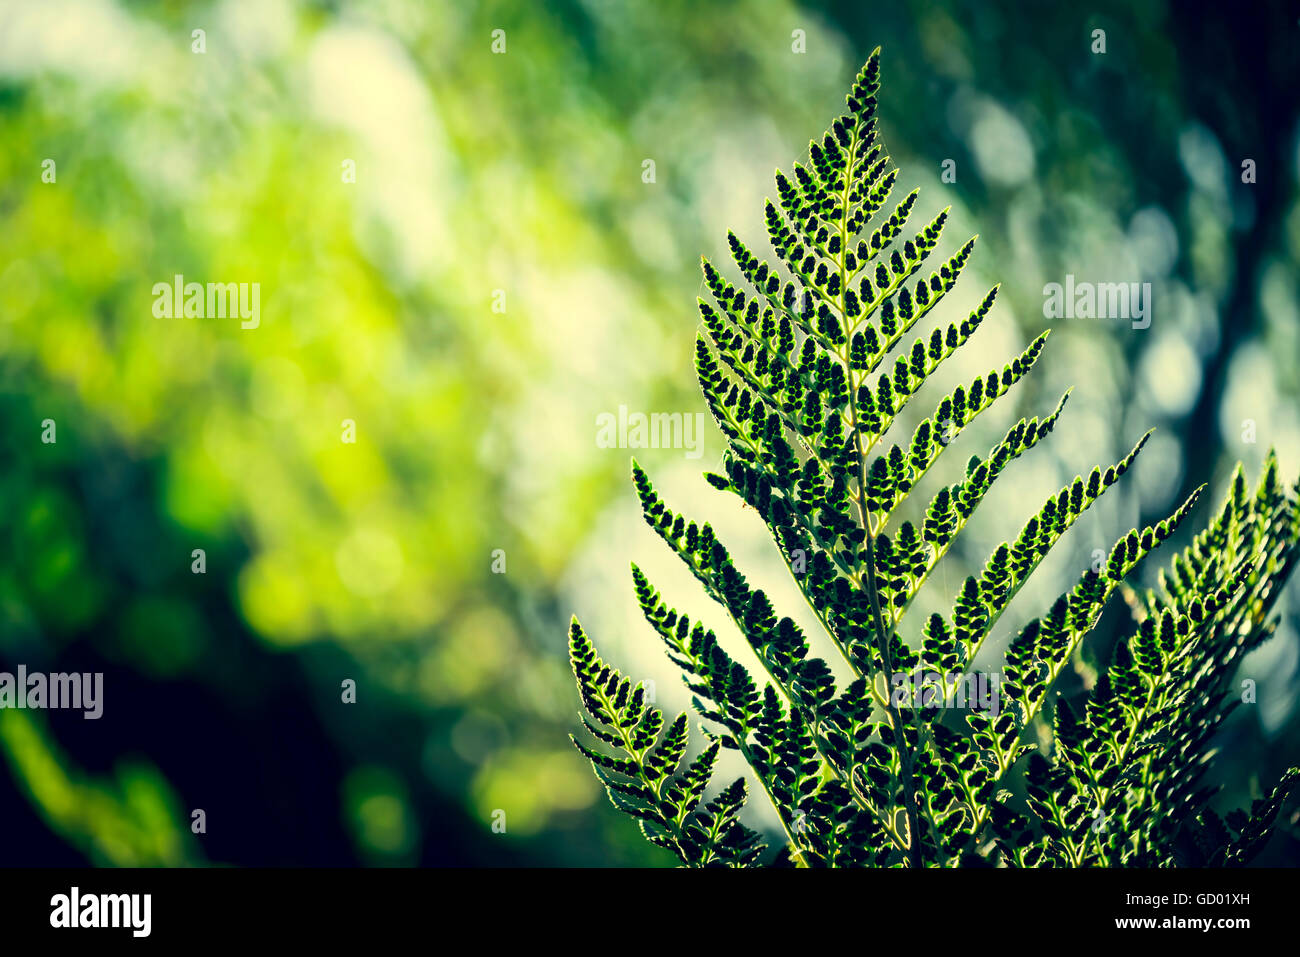 Retro hipster style nature environment scenery, fern leaf and forest trees blur background in green colors. Stock Photo